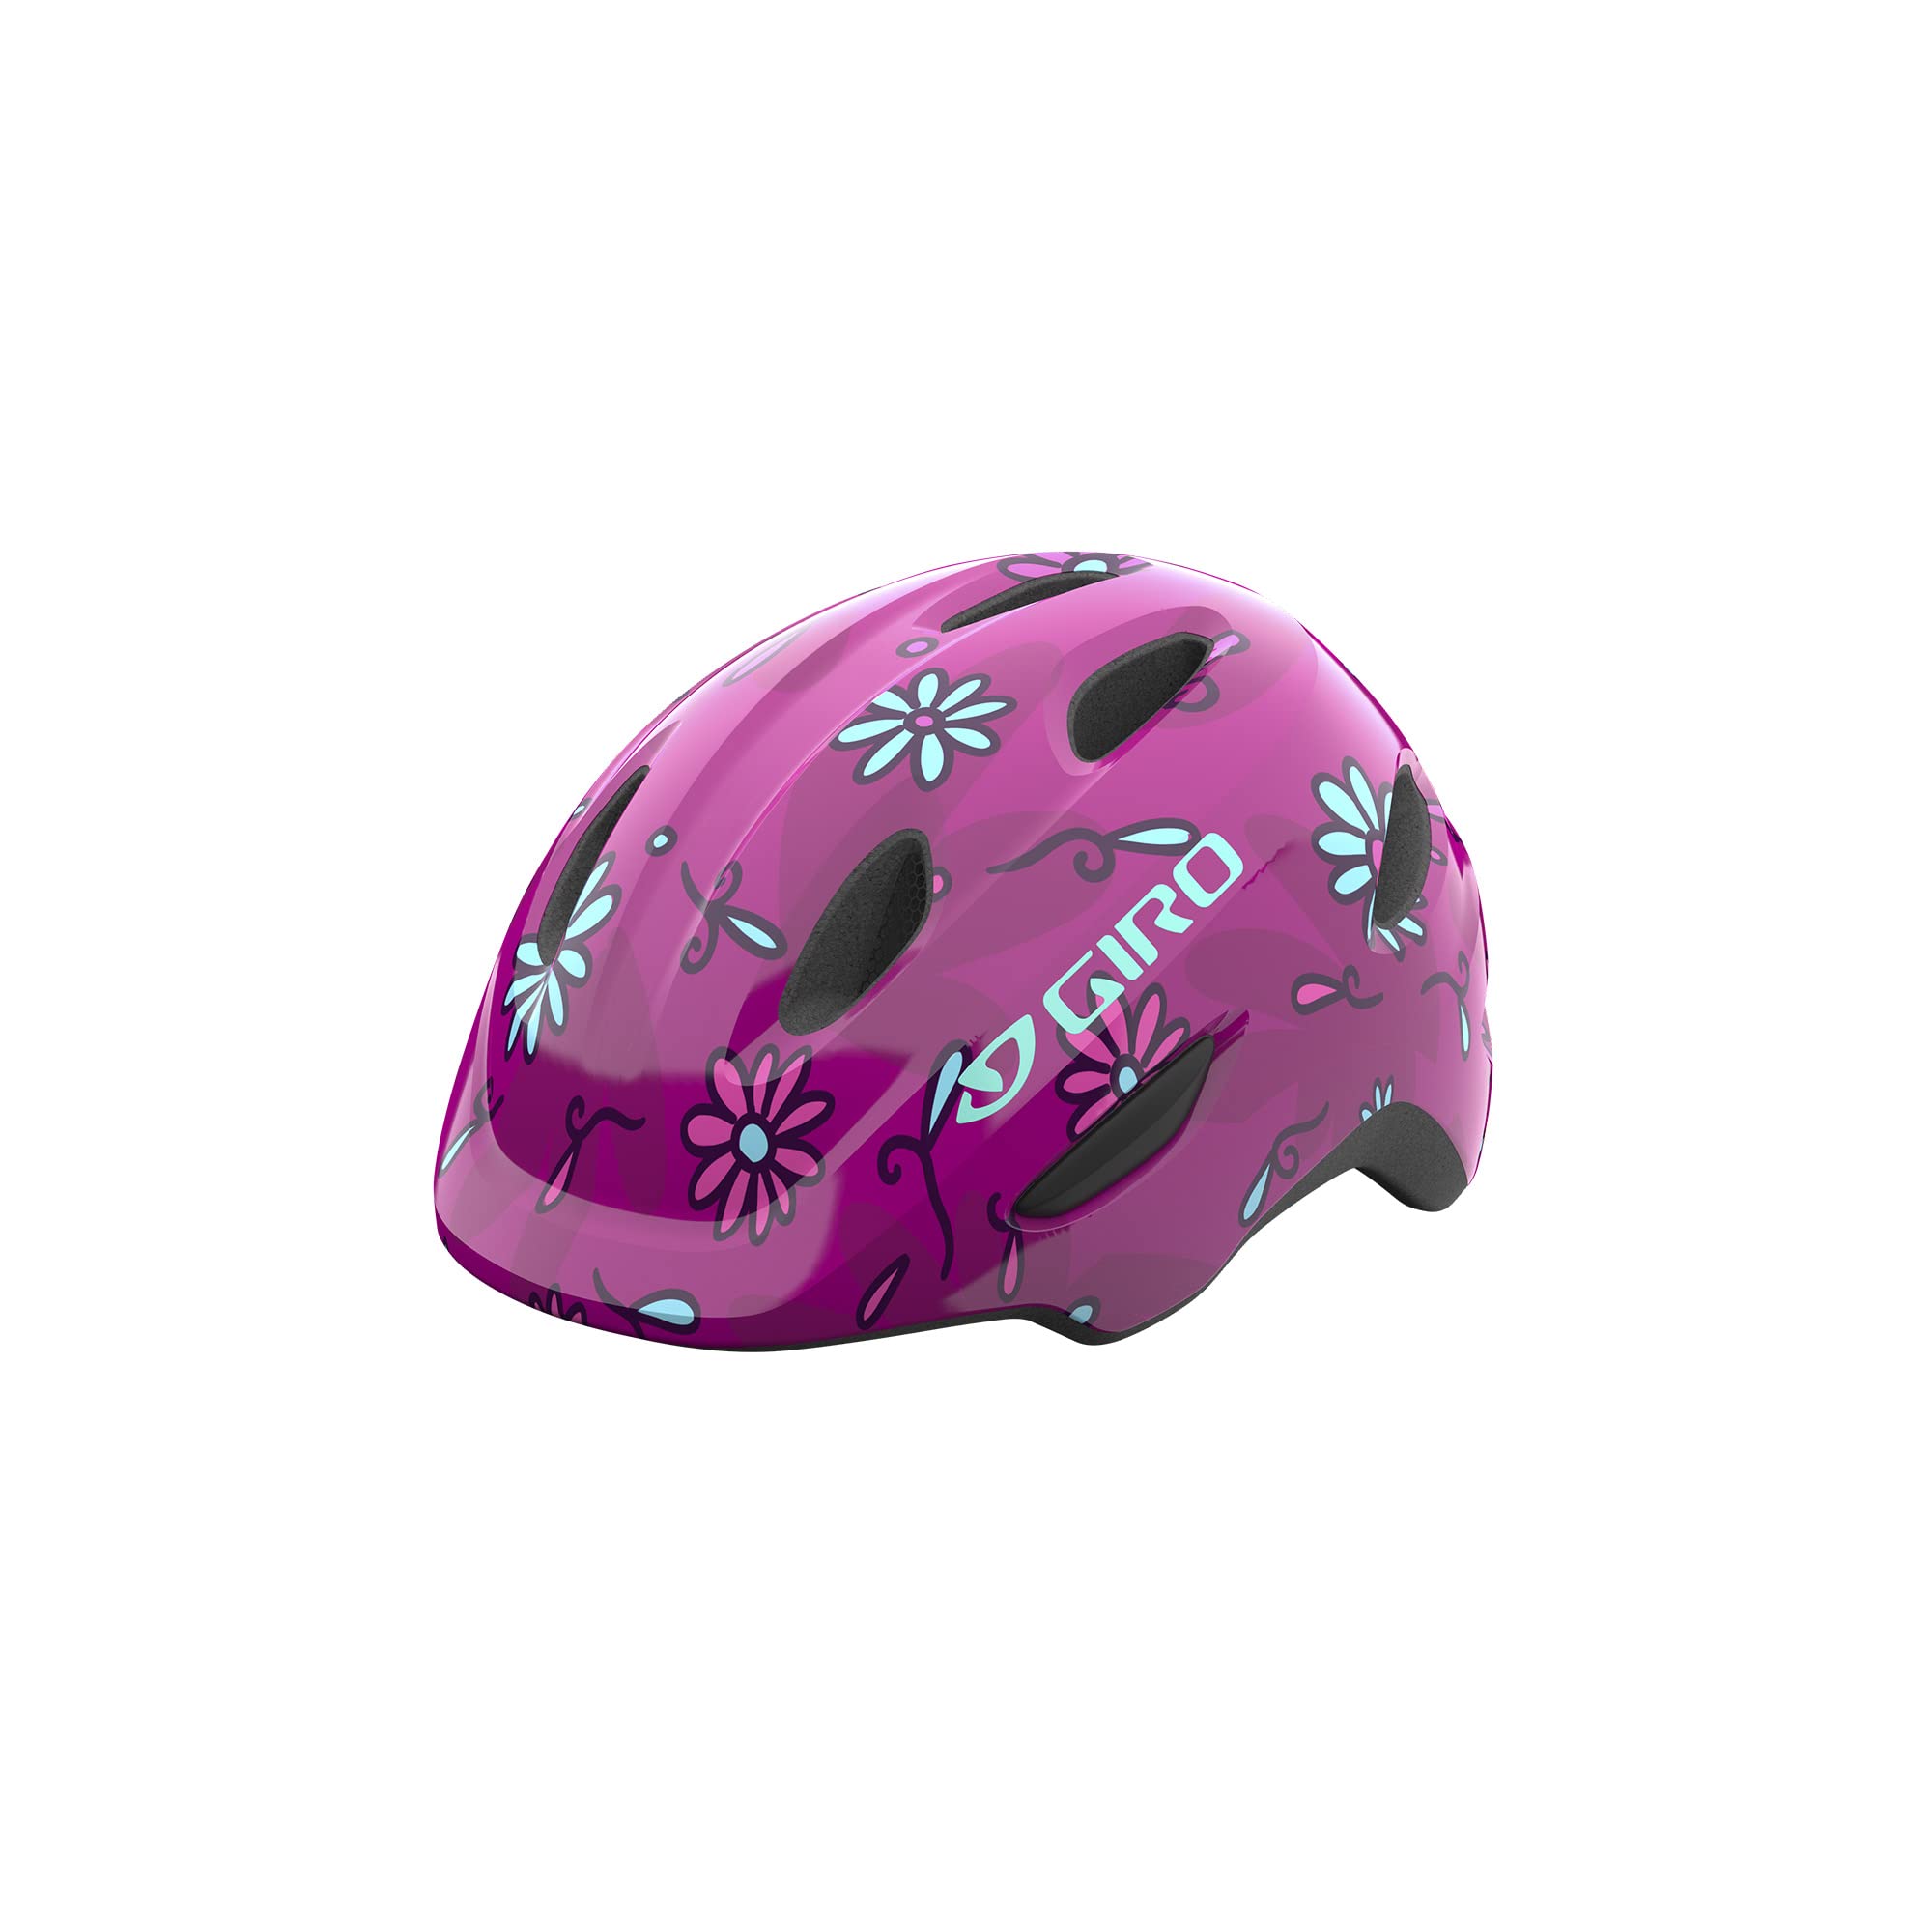 Giro Scamp MIPS Youth Recreational Cycling Helmet - Pink Street Sugar Daisies 2022 Small 49-53 cm